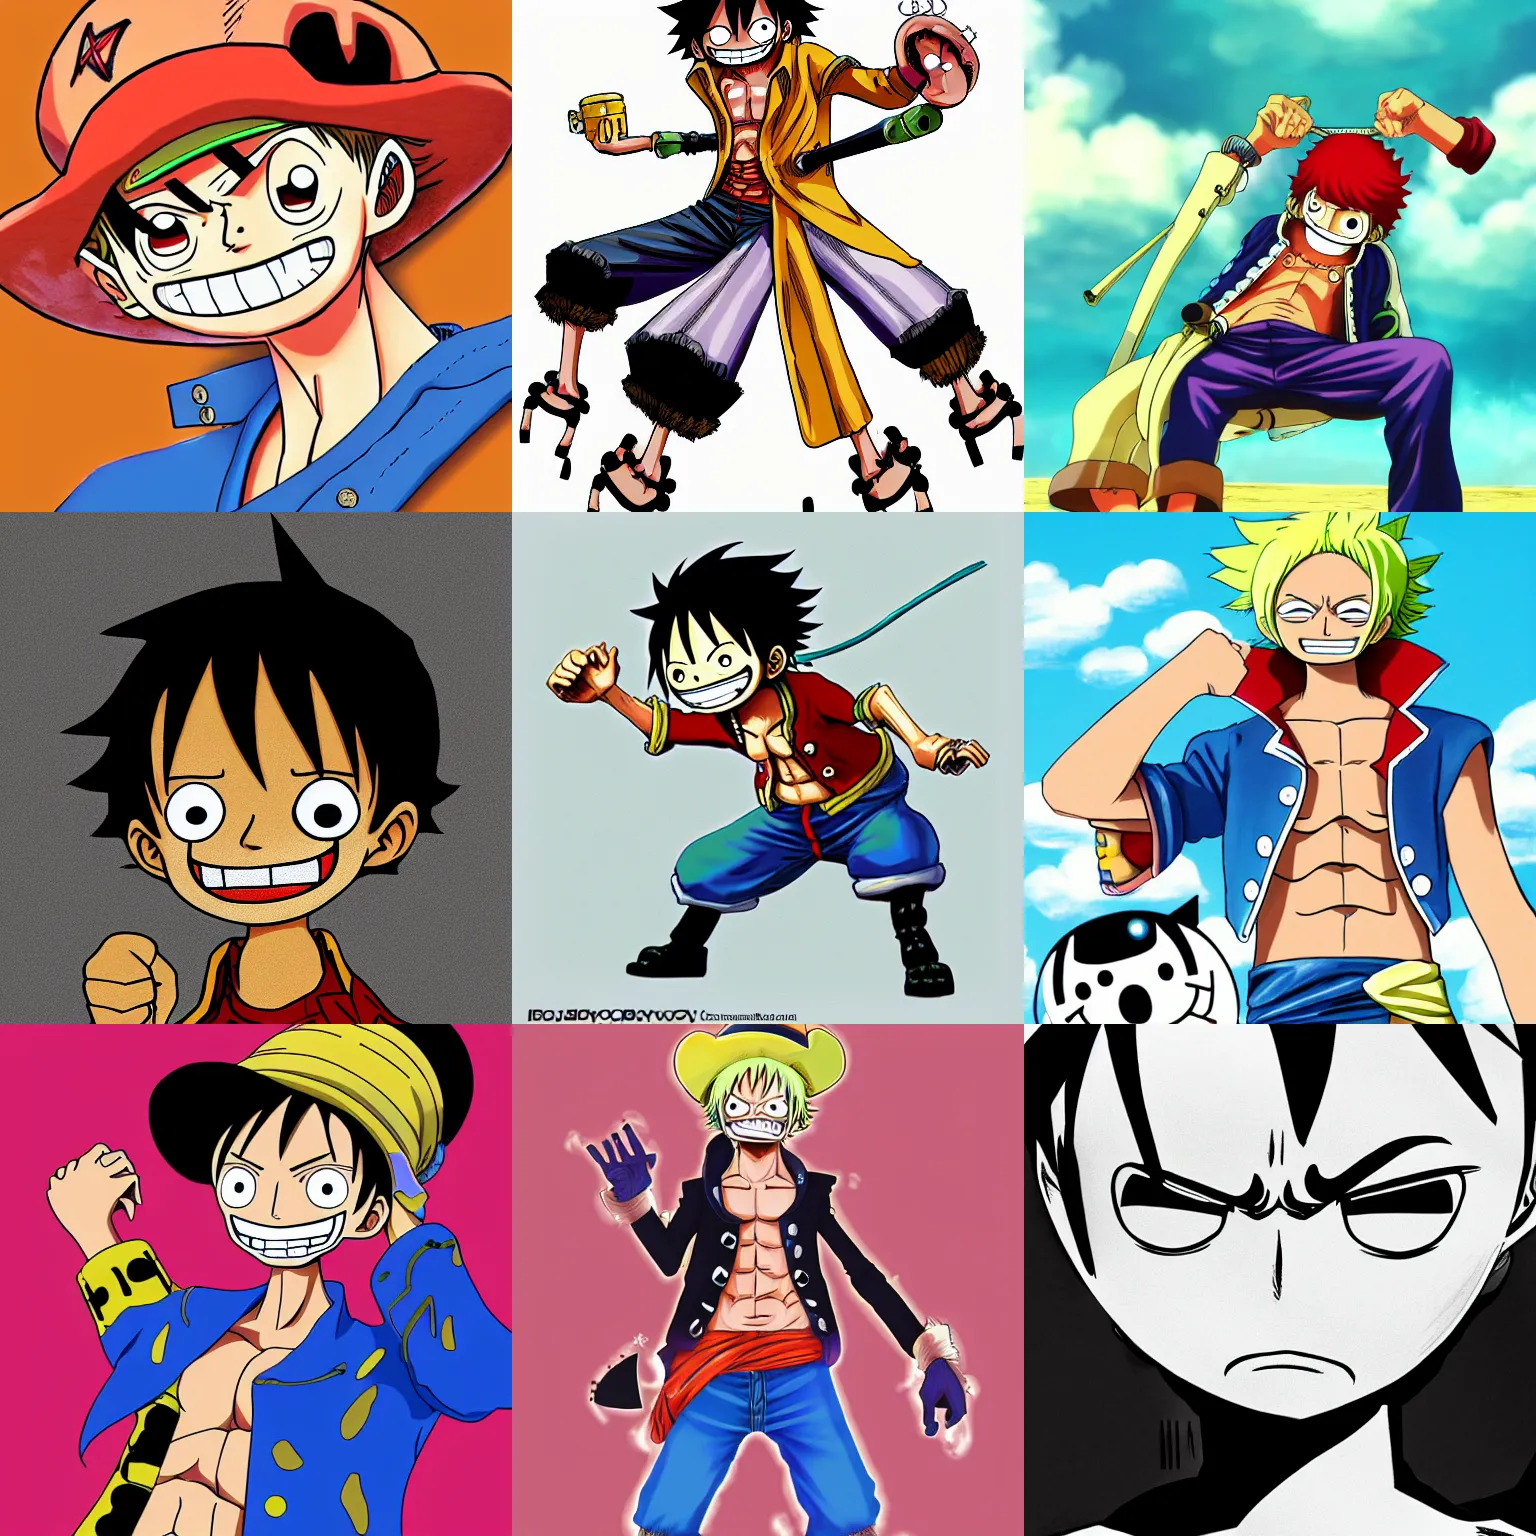 ANIMATION OF ONE PIECE  on Twitter